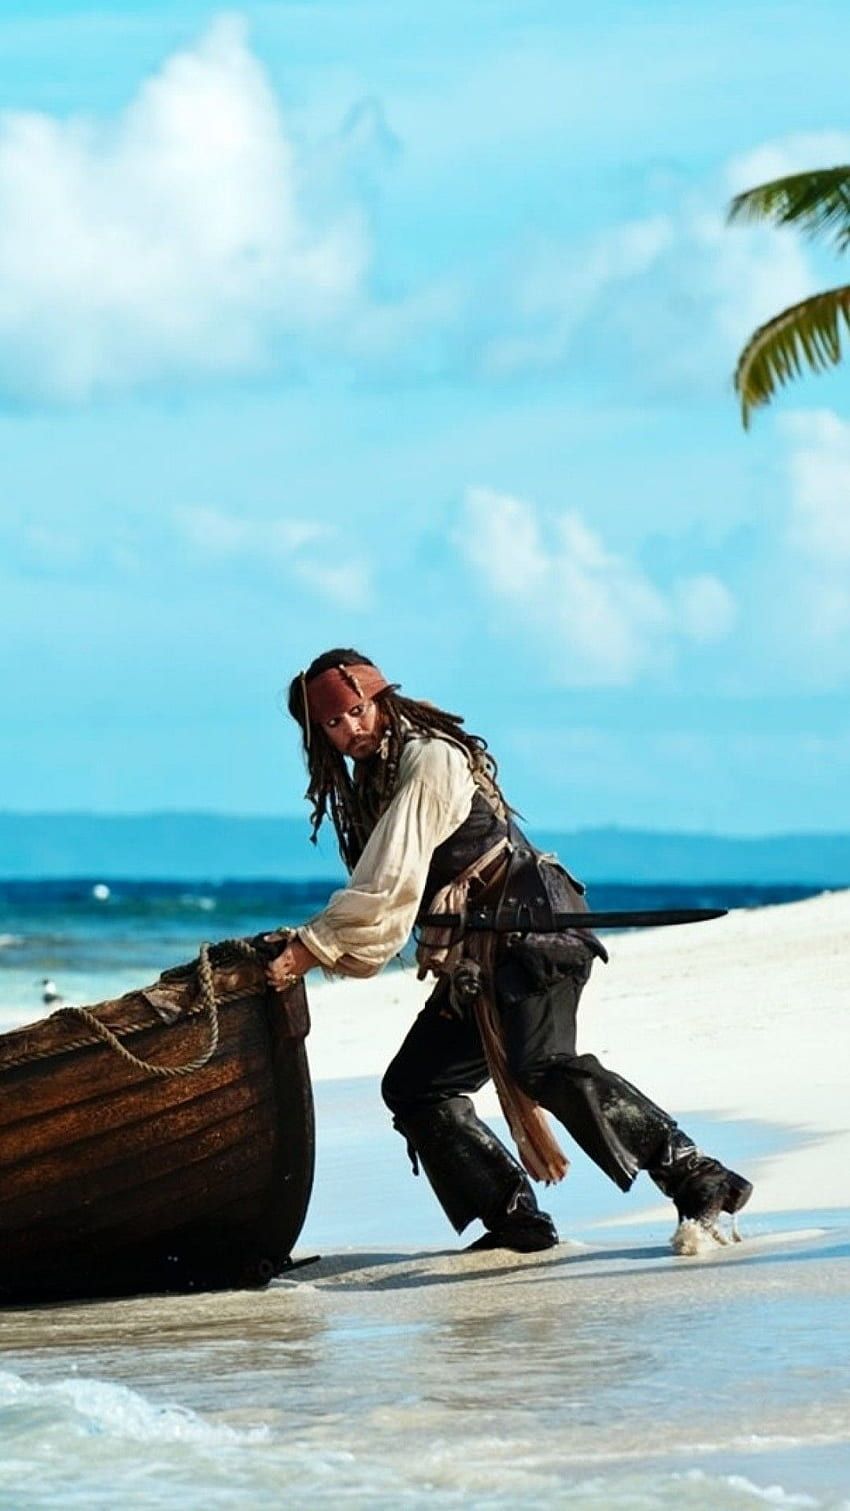 A man in pirate clothing is on the beach - Pirate